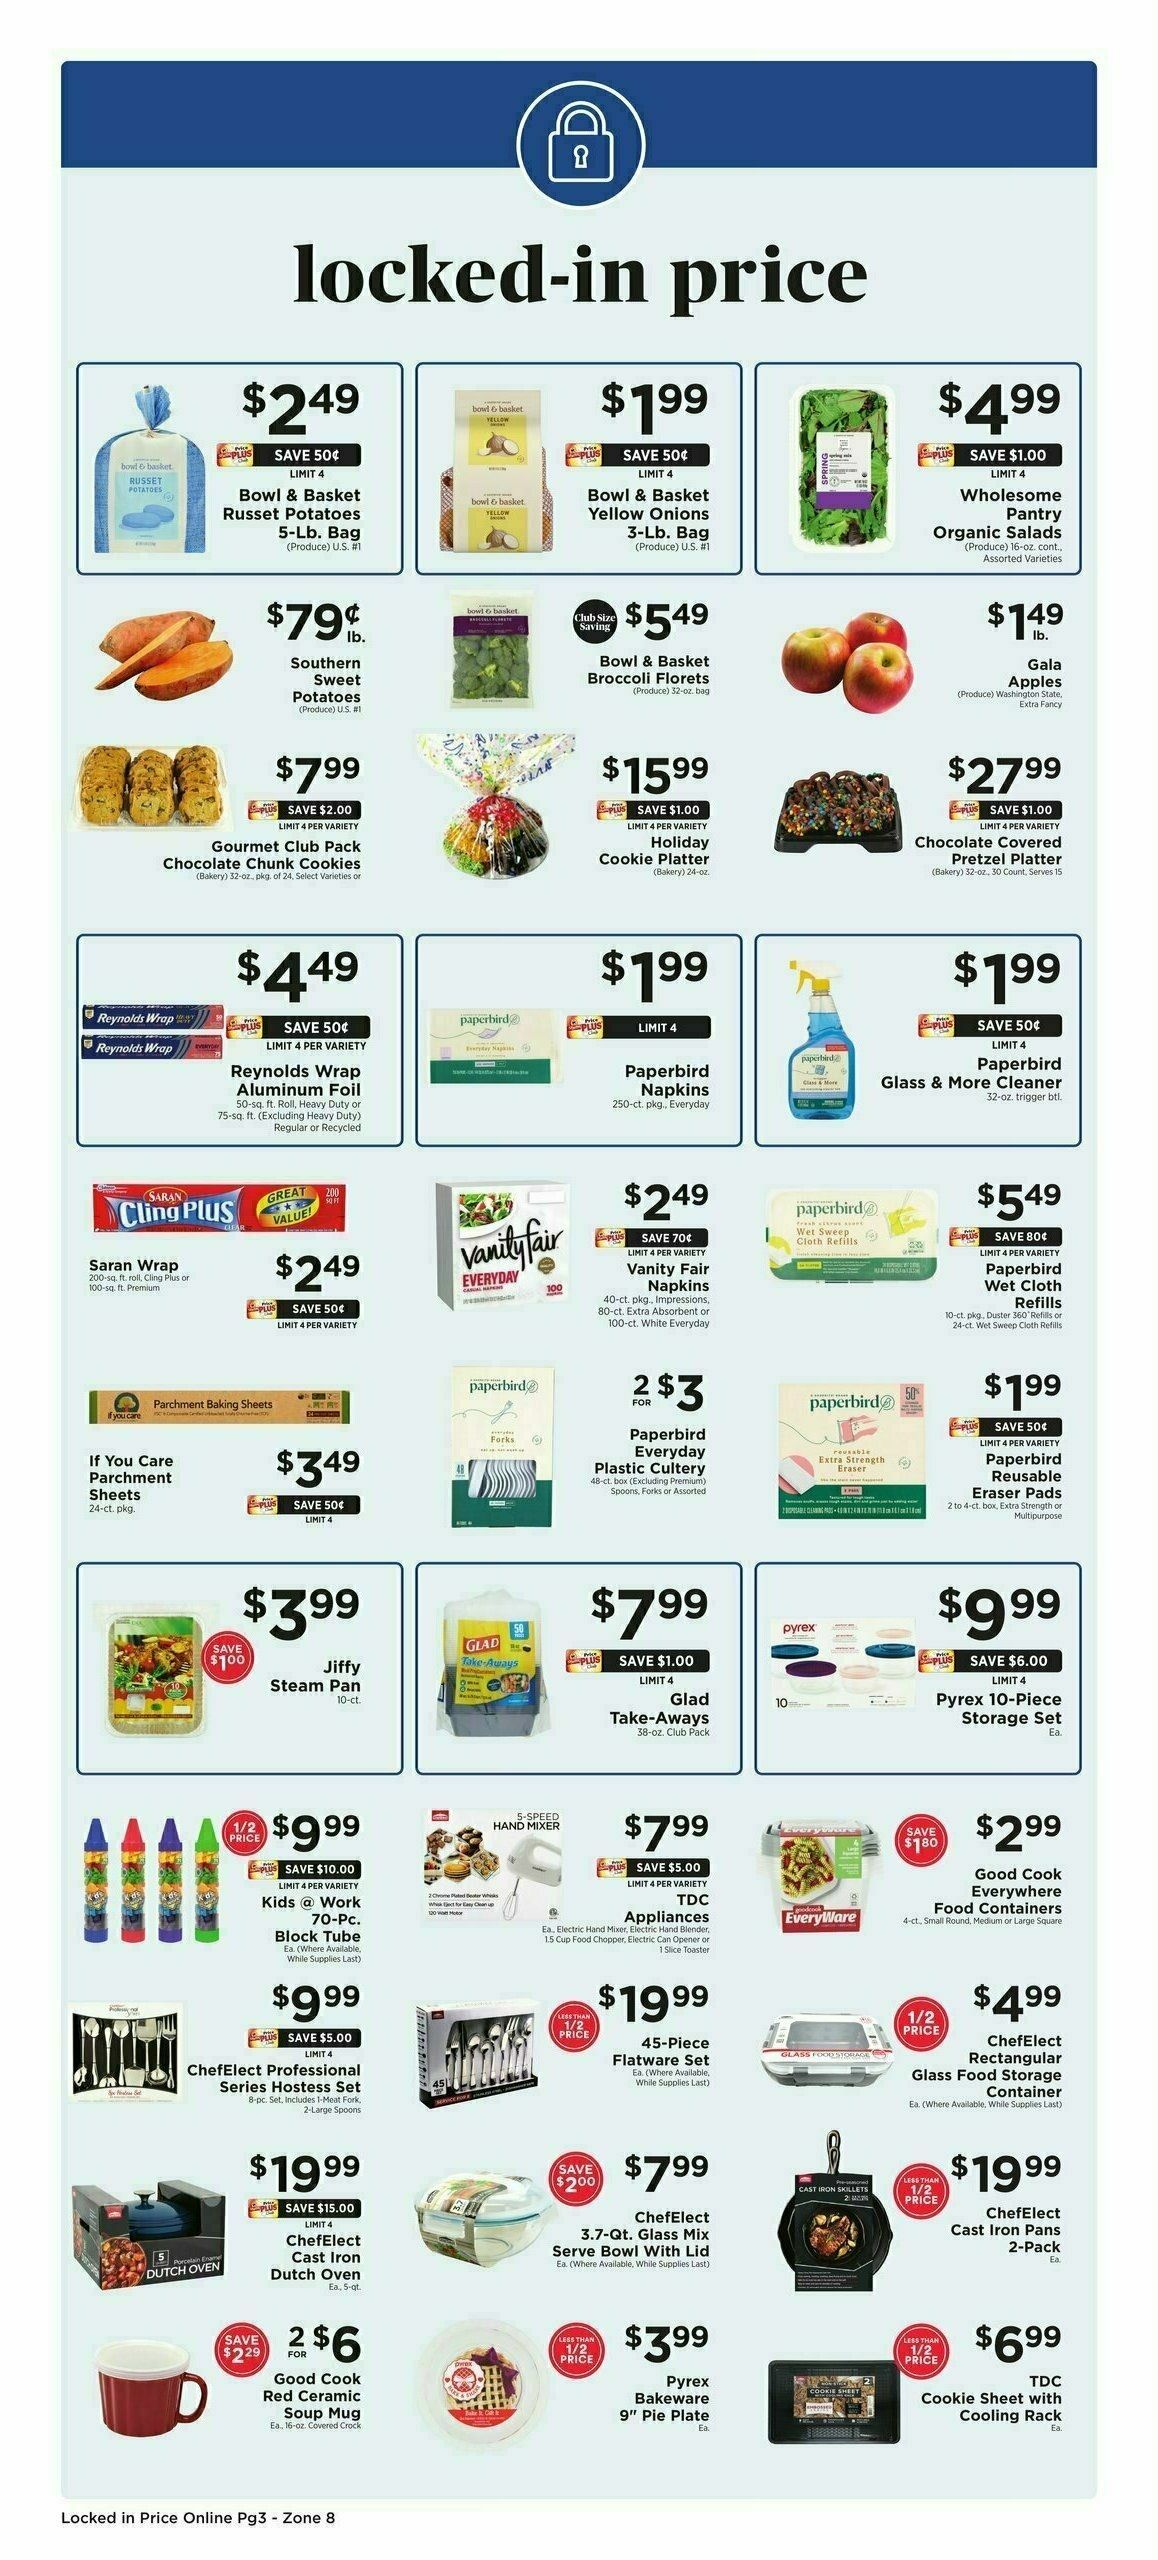 ShopRite Locked-in-Price Weekly Ad from November 24